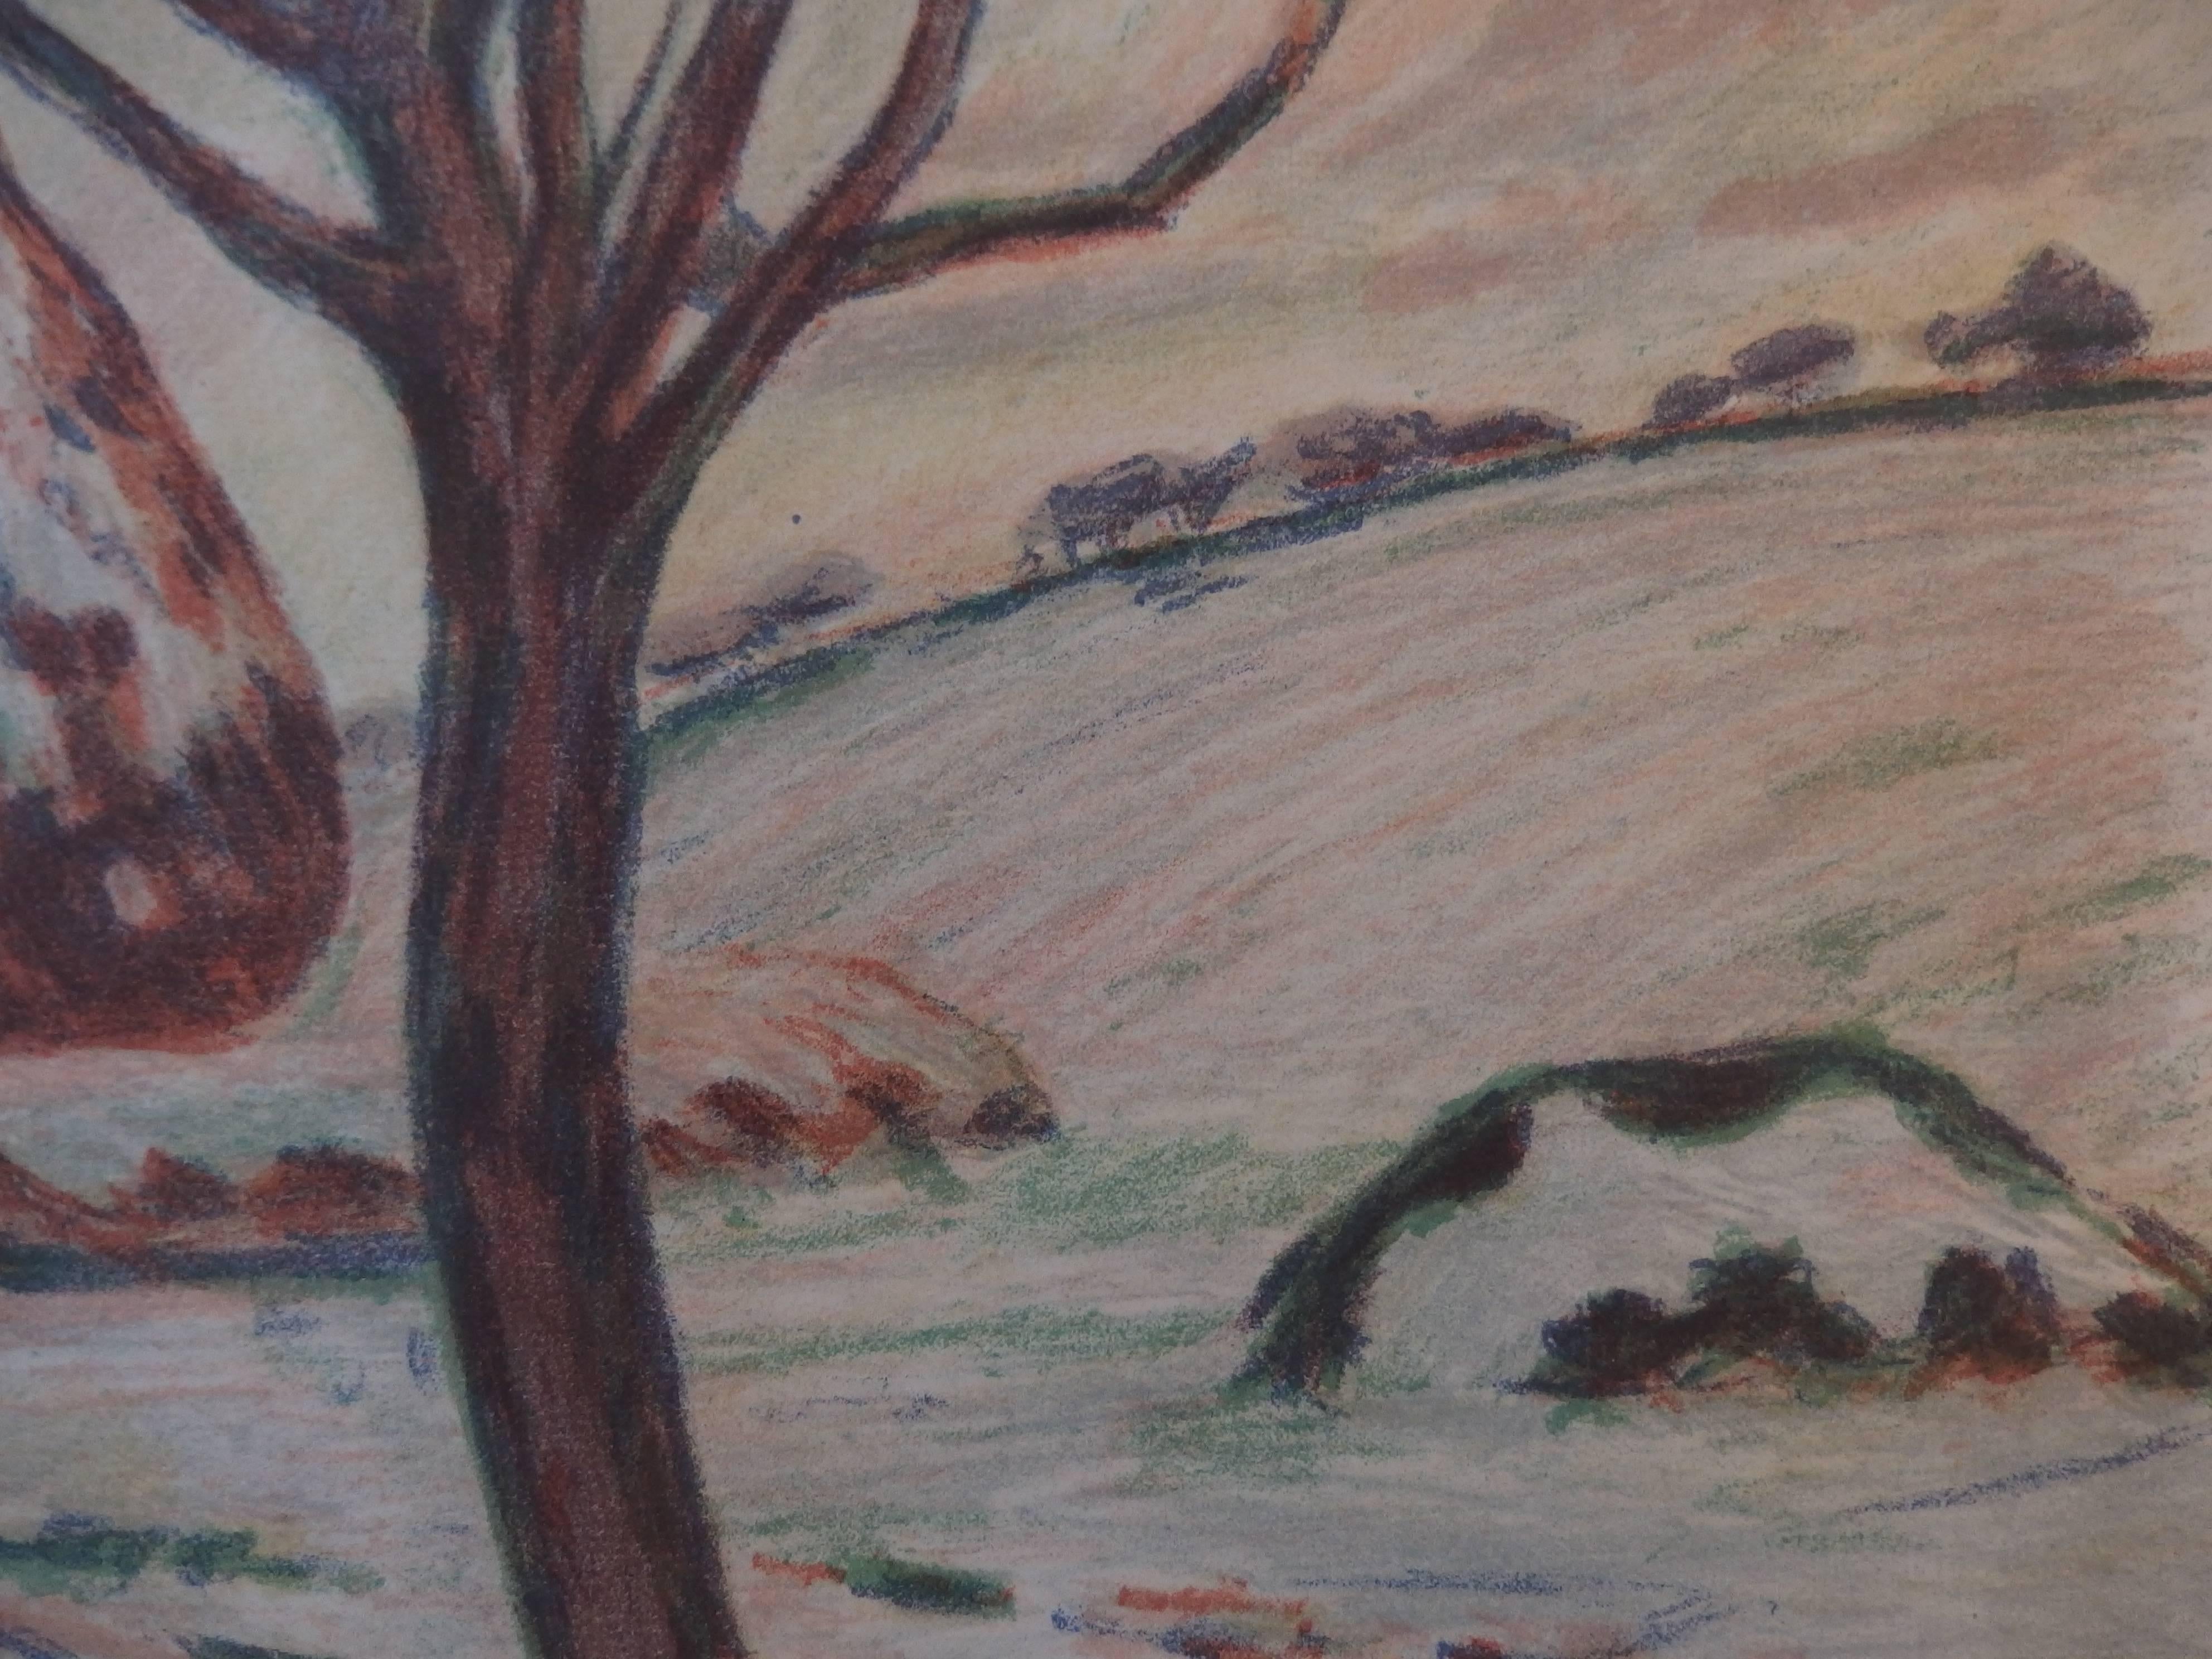 Haystacks near Palaiseau - Original handsigned lithograph - 100 copies - Post-Impressionist Print by Armand Guillaumin